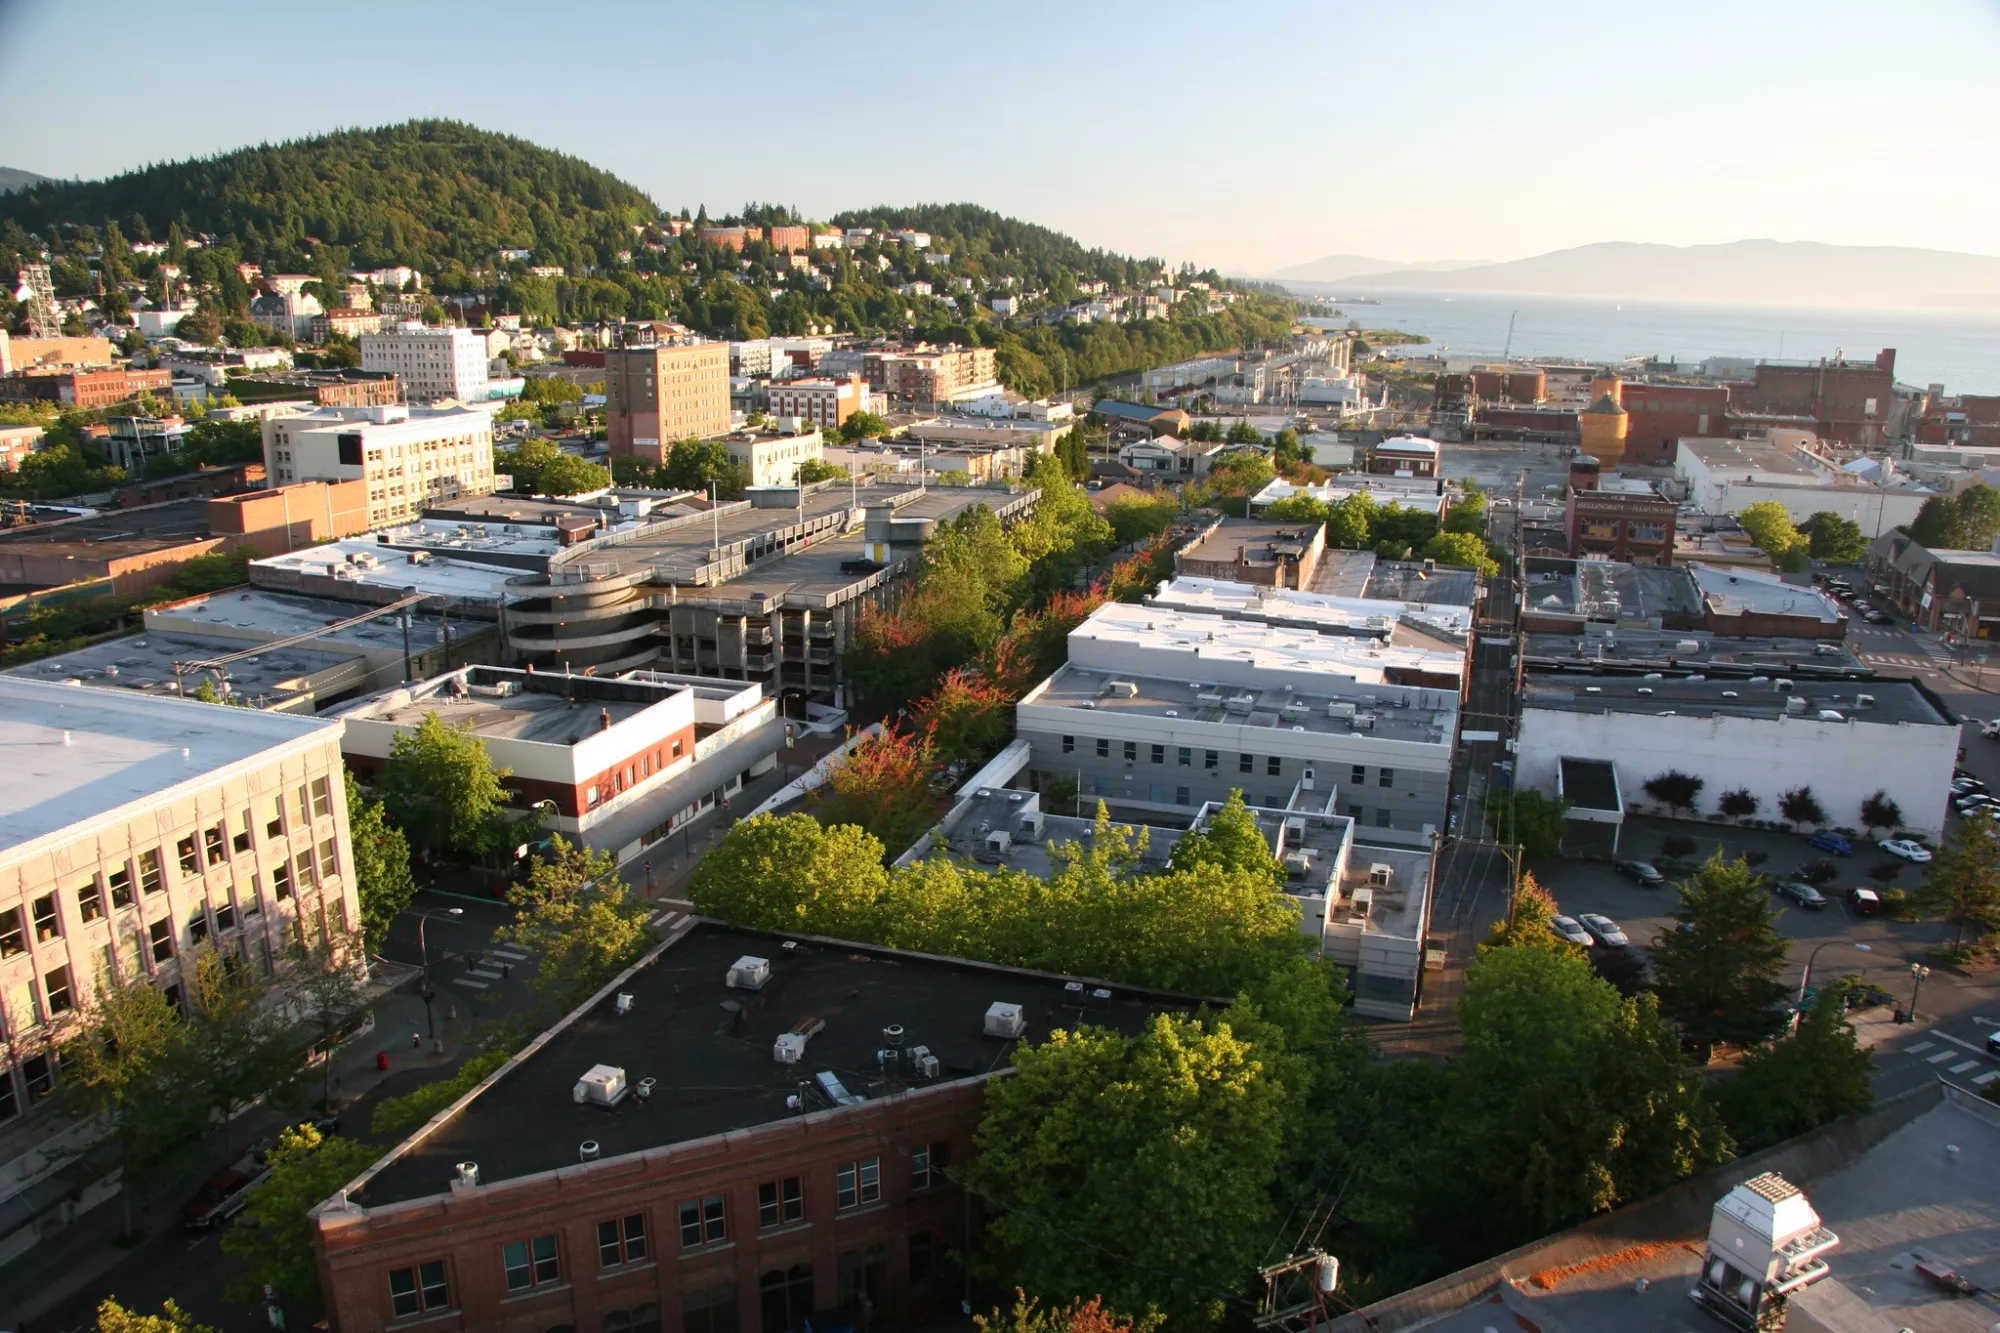 Bellingham Bay surrounded by trees and buildings